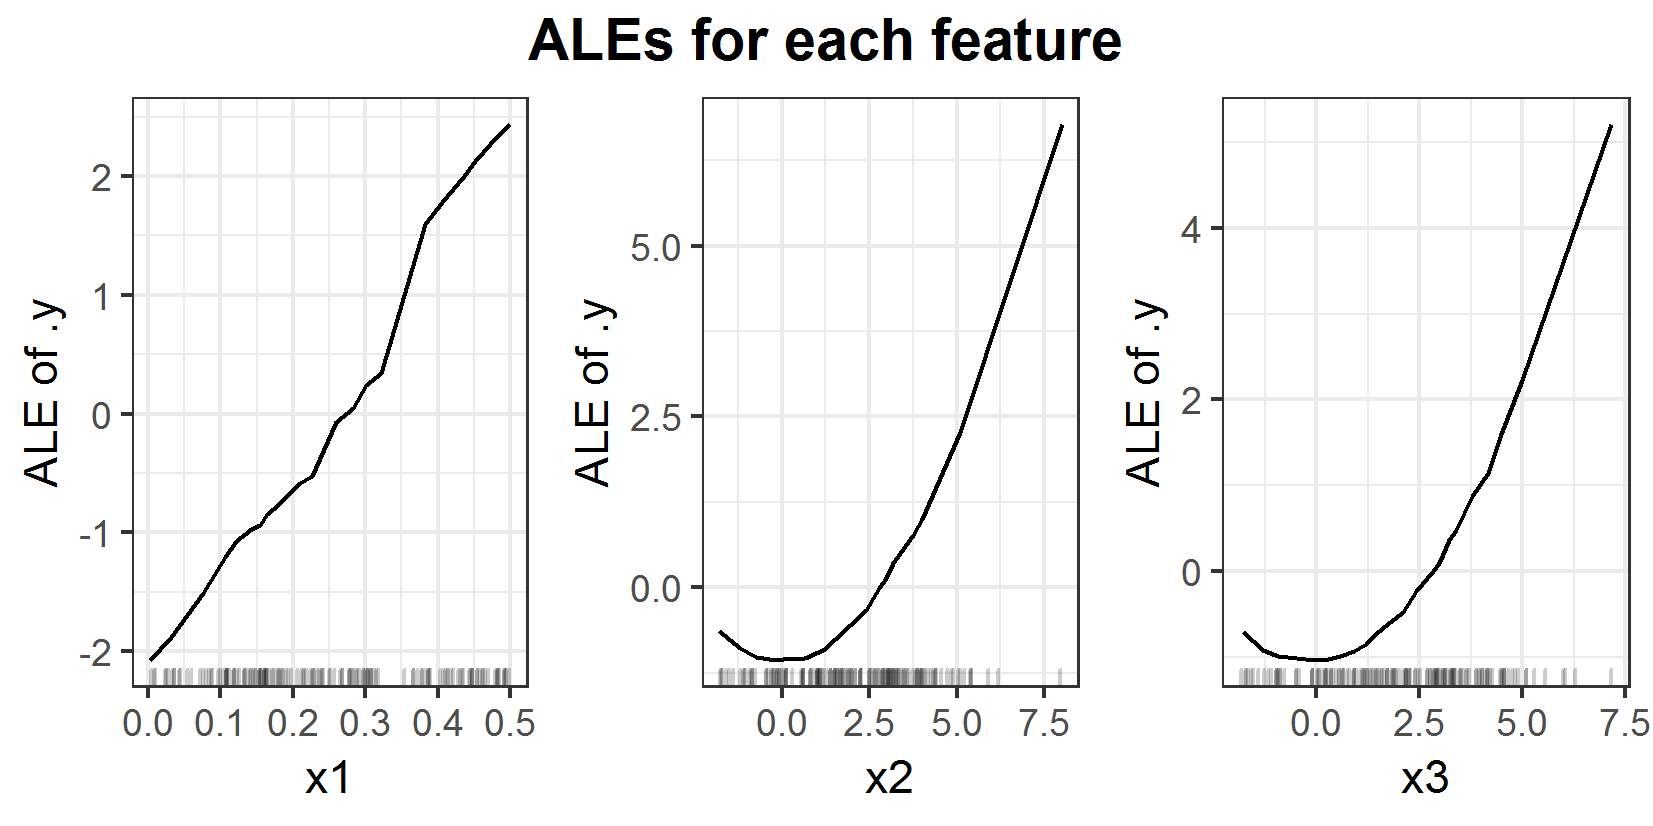 ALEs for prediction function \(f(x_1, x_2, x_3) = x_1 x_2 x_3\).